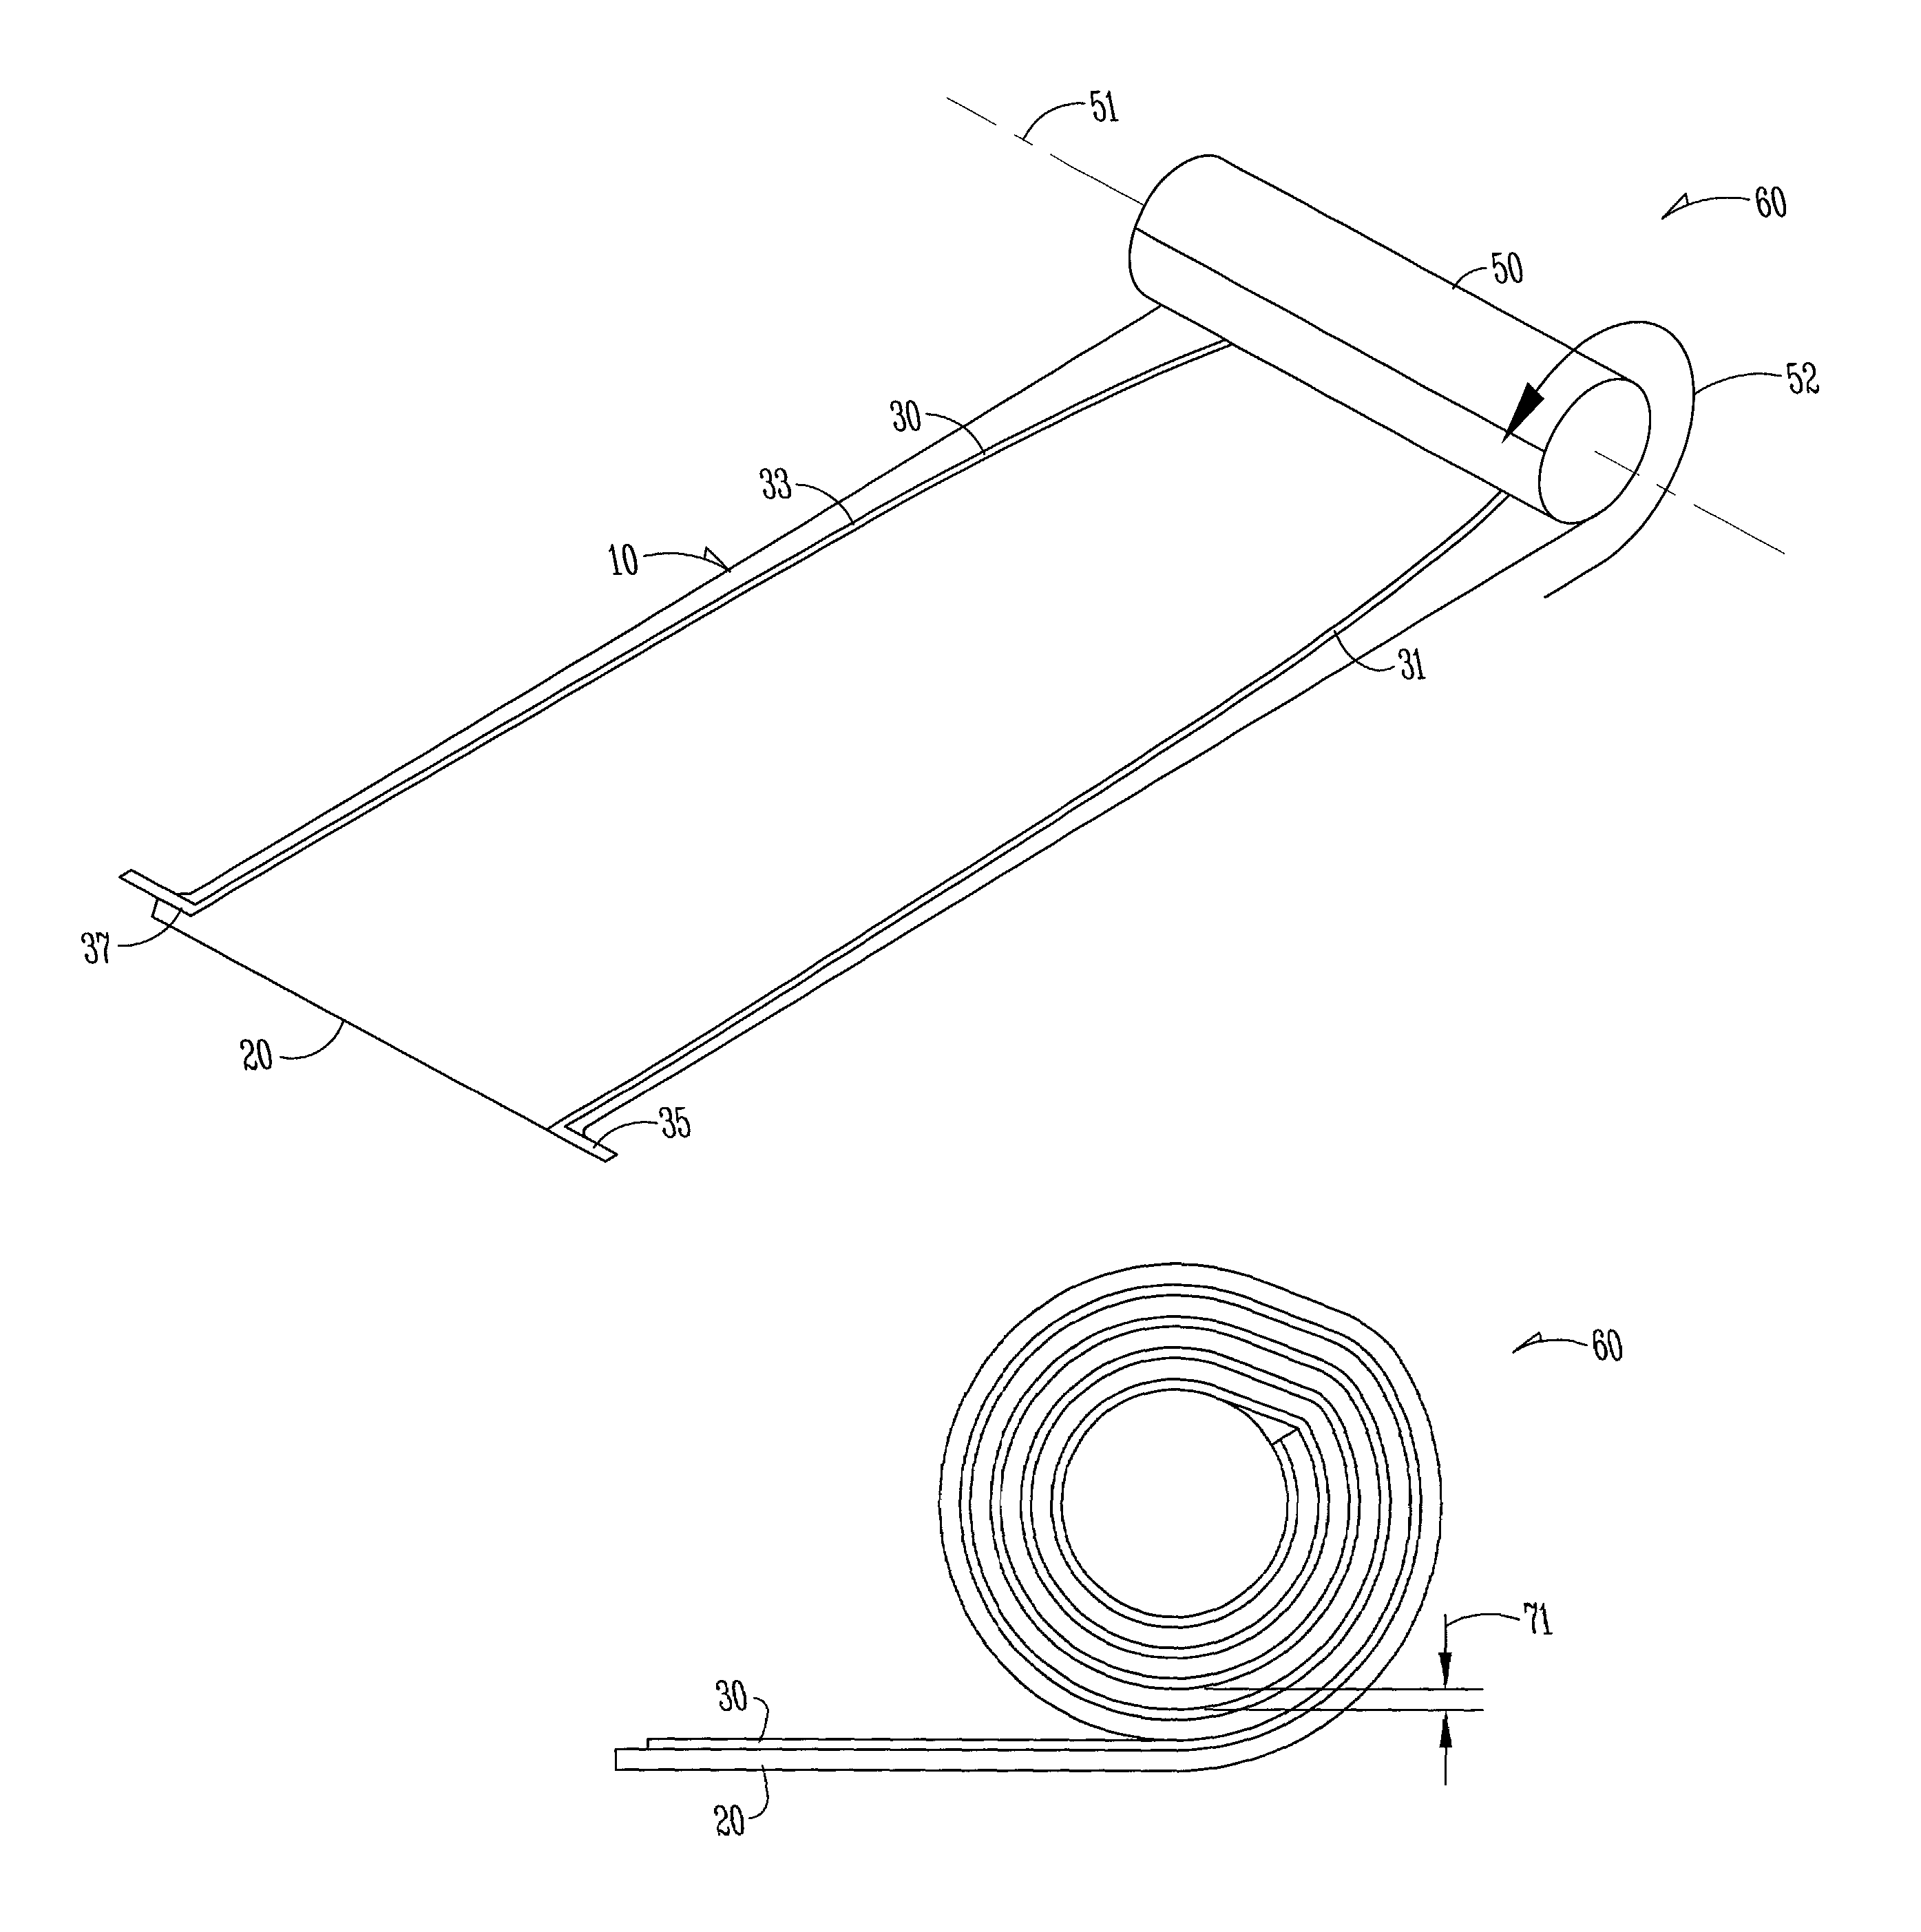 Method of manufacturing a microcoil construction